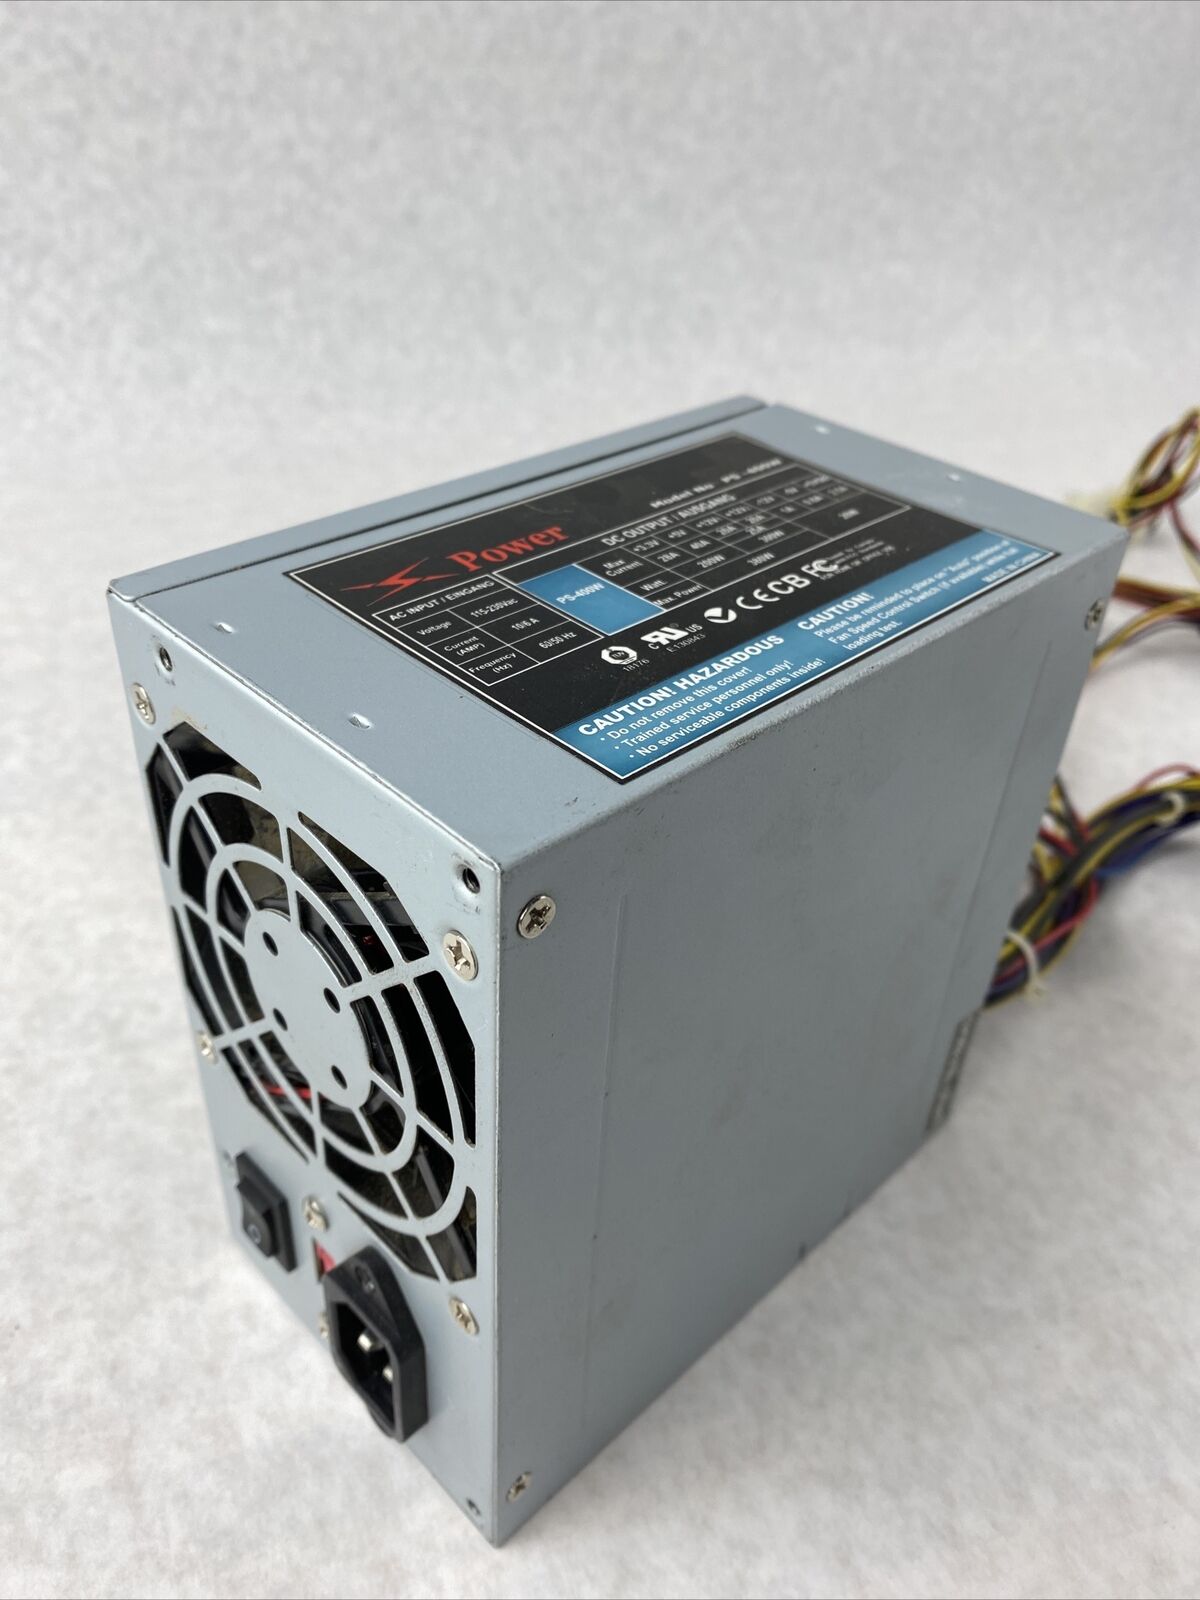 POWER PS -400W 380W PS TESTED